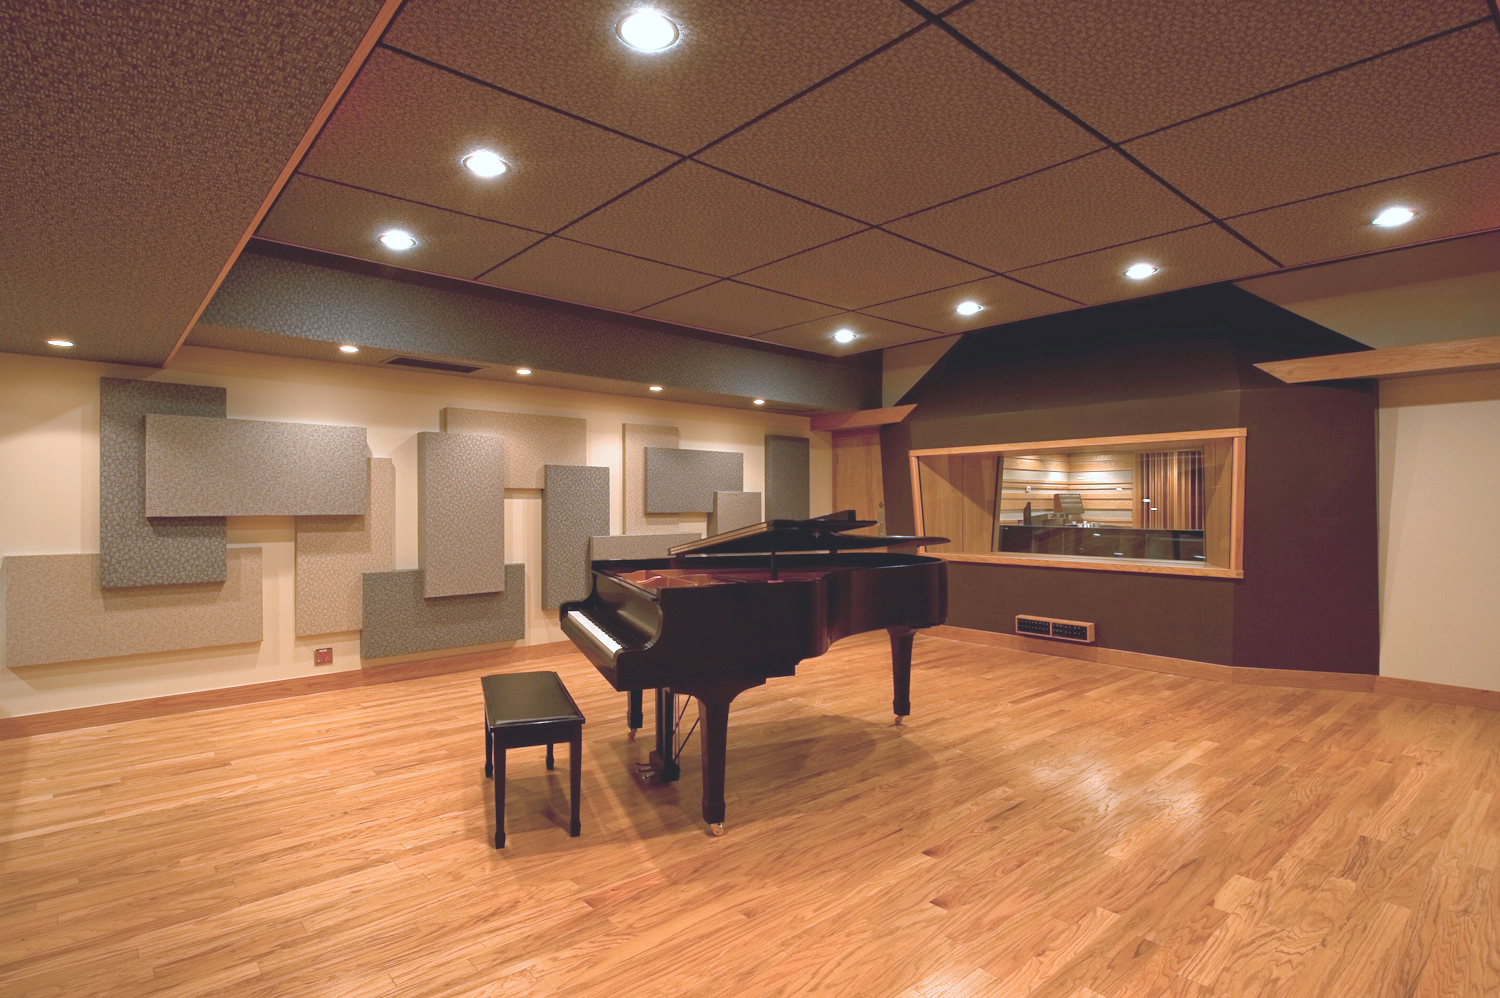   Studio A   Designed for any genre, any project   Book your next session  